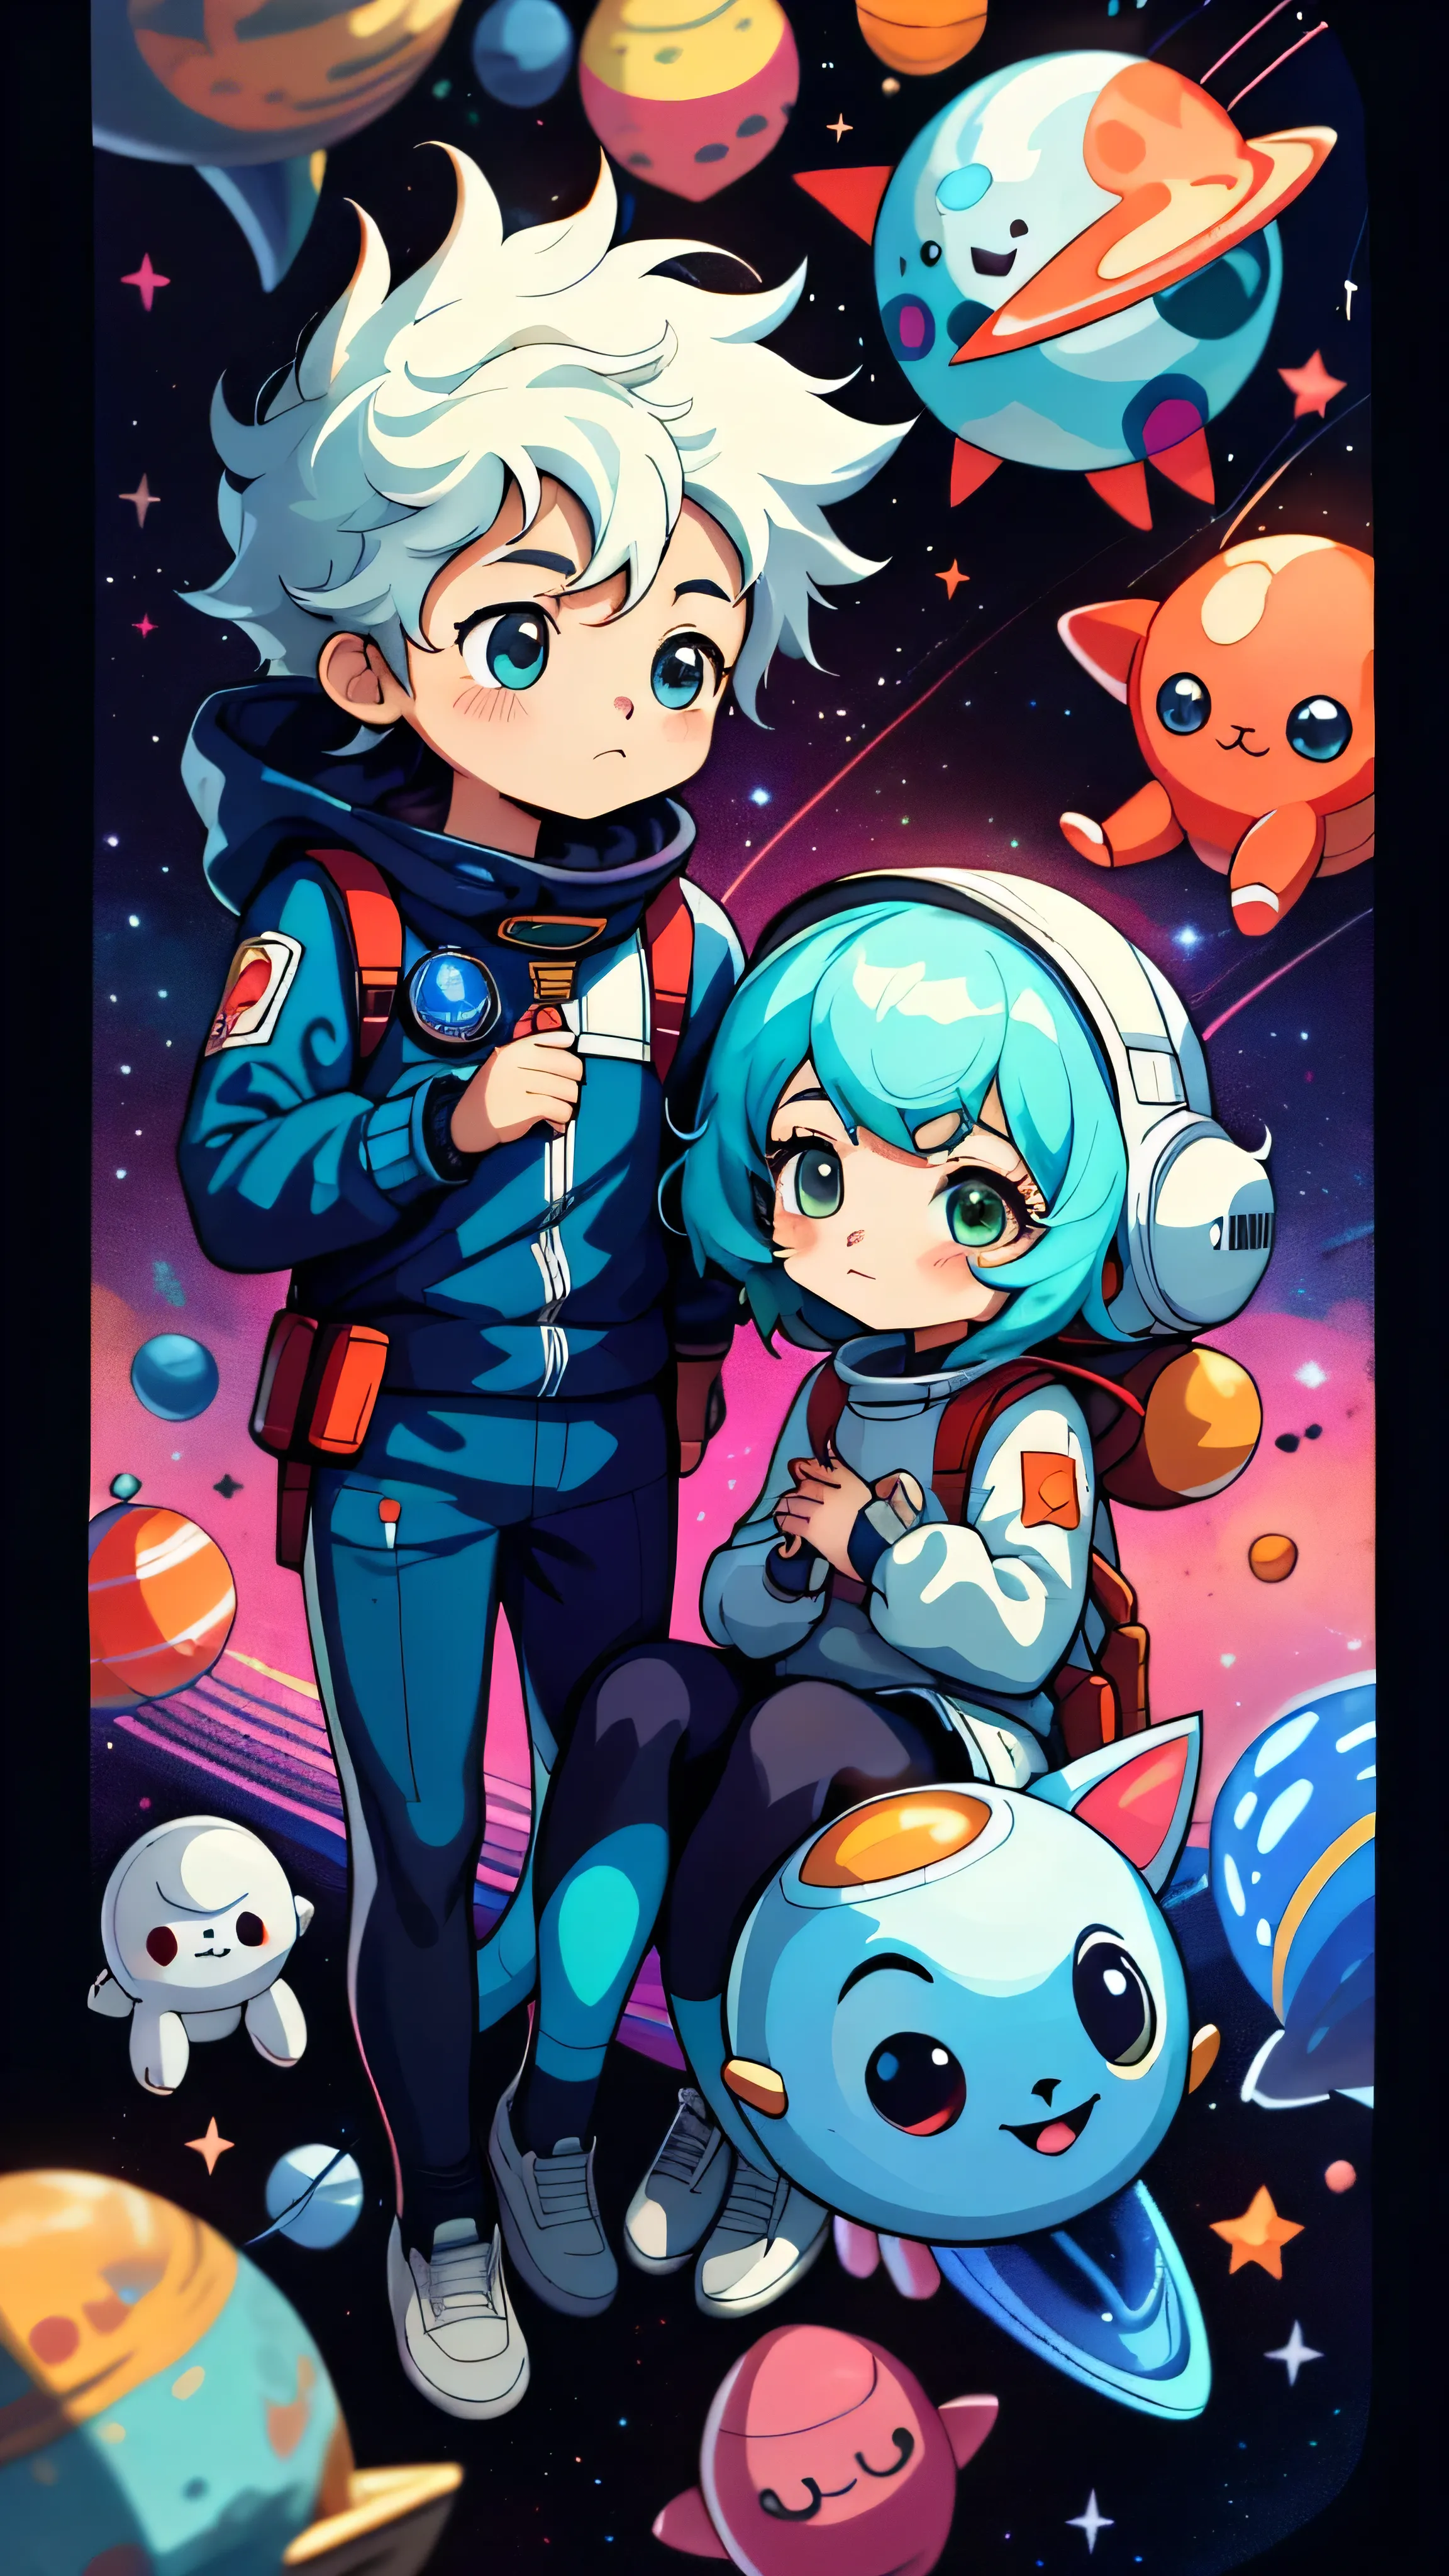 Anime-style illustration of a boy and a girl in space, accompanied by a fluffy kitten. An official fan art piece, as they explore the depths of the universe in their shiny spaceship. The boy and girl are dressed in suits adorned with stars and planets, their eyes wide with awe as they gaze at the starry sky. The kitten, carefully secured in its own little astronaut outfit, peeks curiously from the cockpit window. The scene is filled with vibrant colors, intricate details, and a sense of lightness and cuteness that heightens the excitement of deep space exploration. The galaxies swirl around them in a breathtaking display of cosmic beauty. A